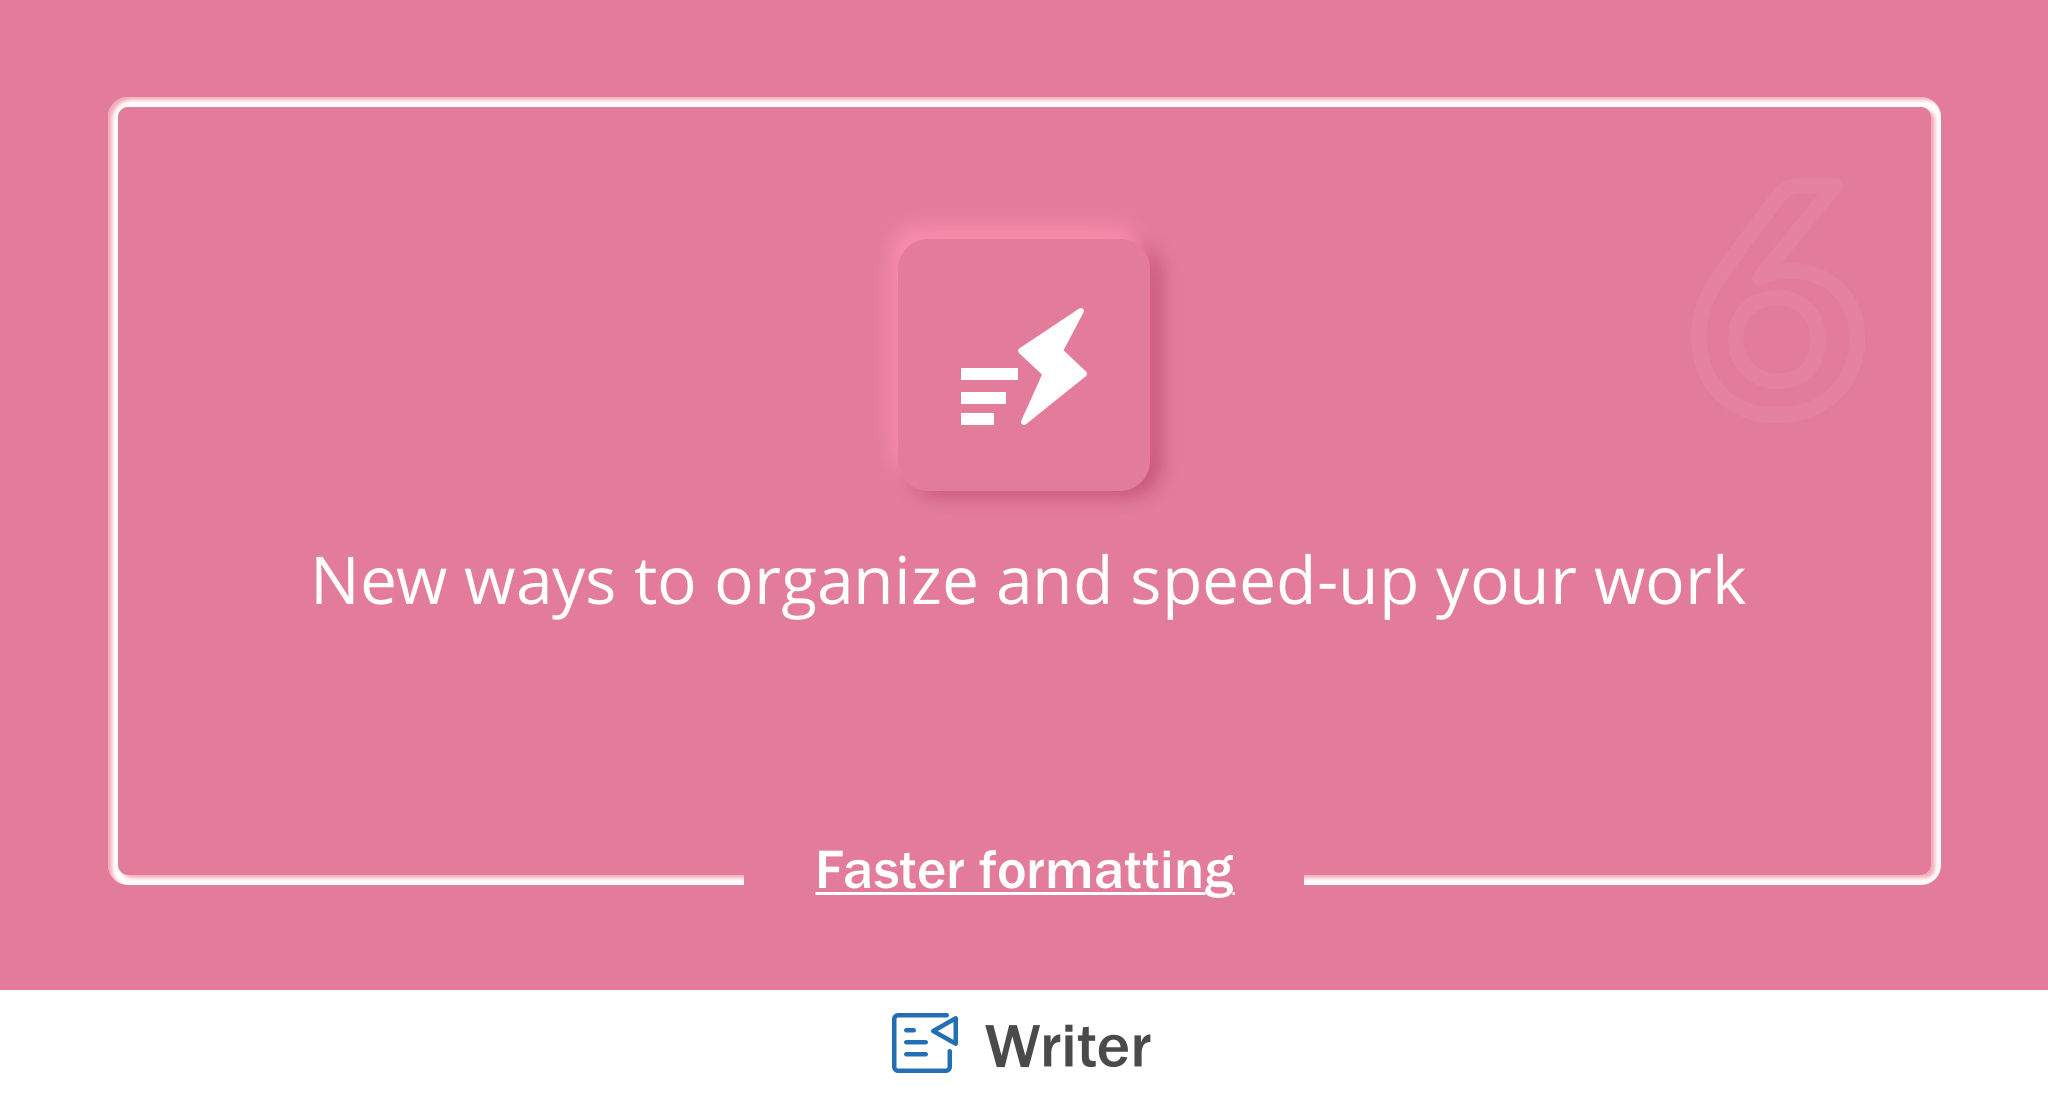 Introducing new and efficient ways to organize and edit your documents